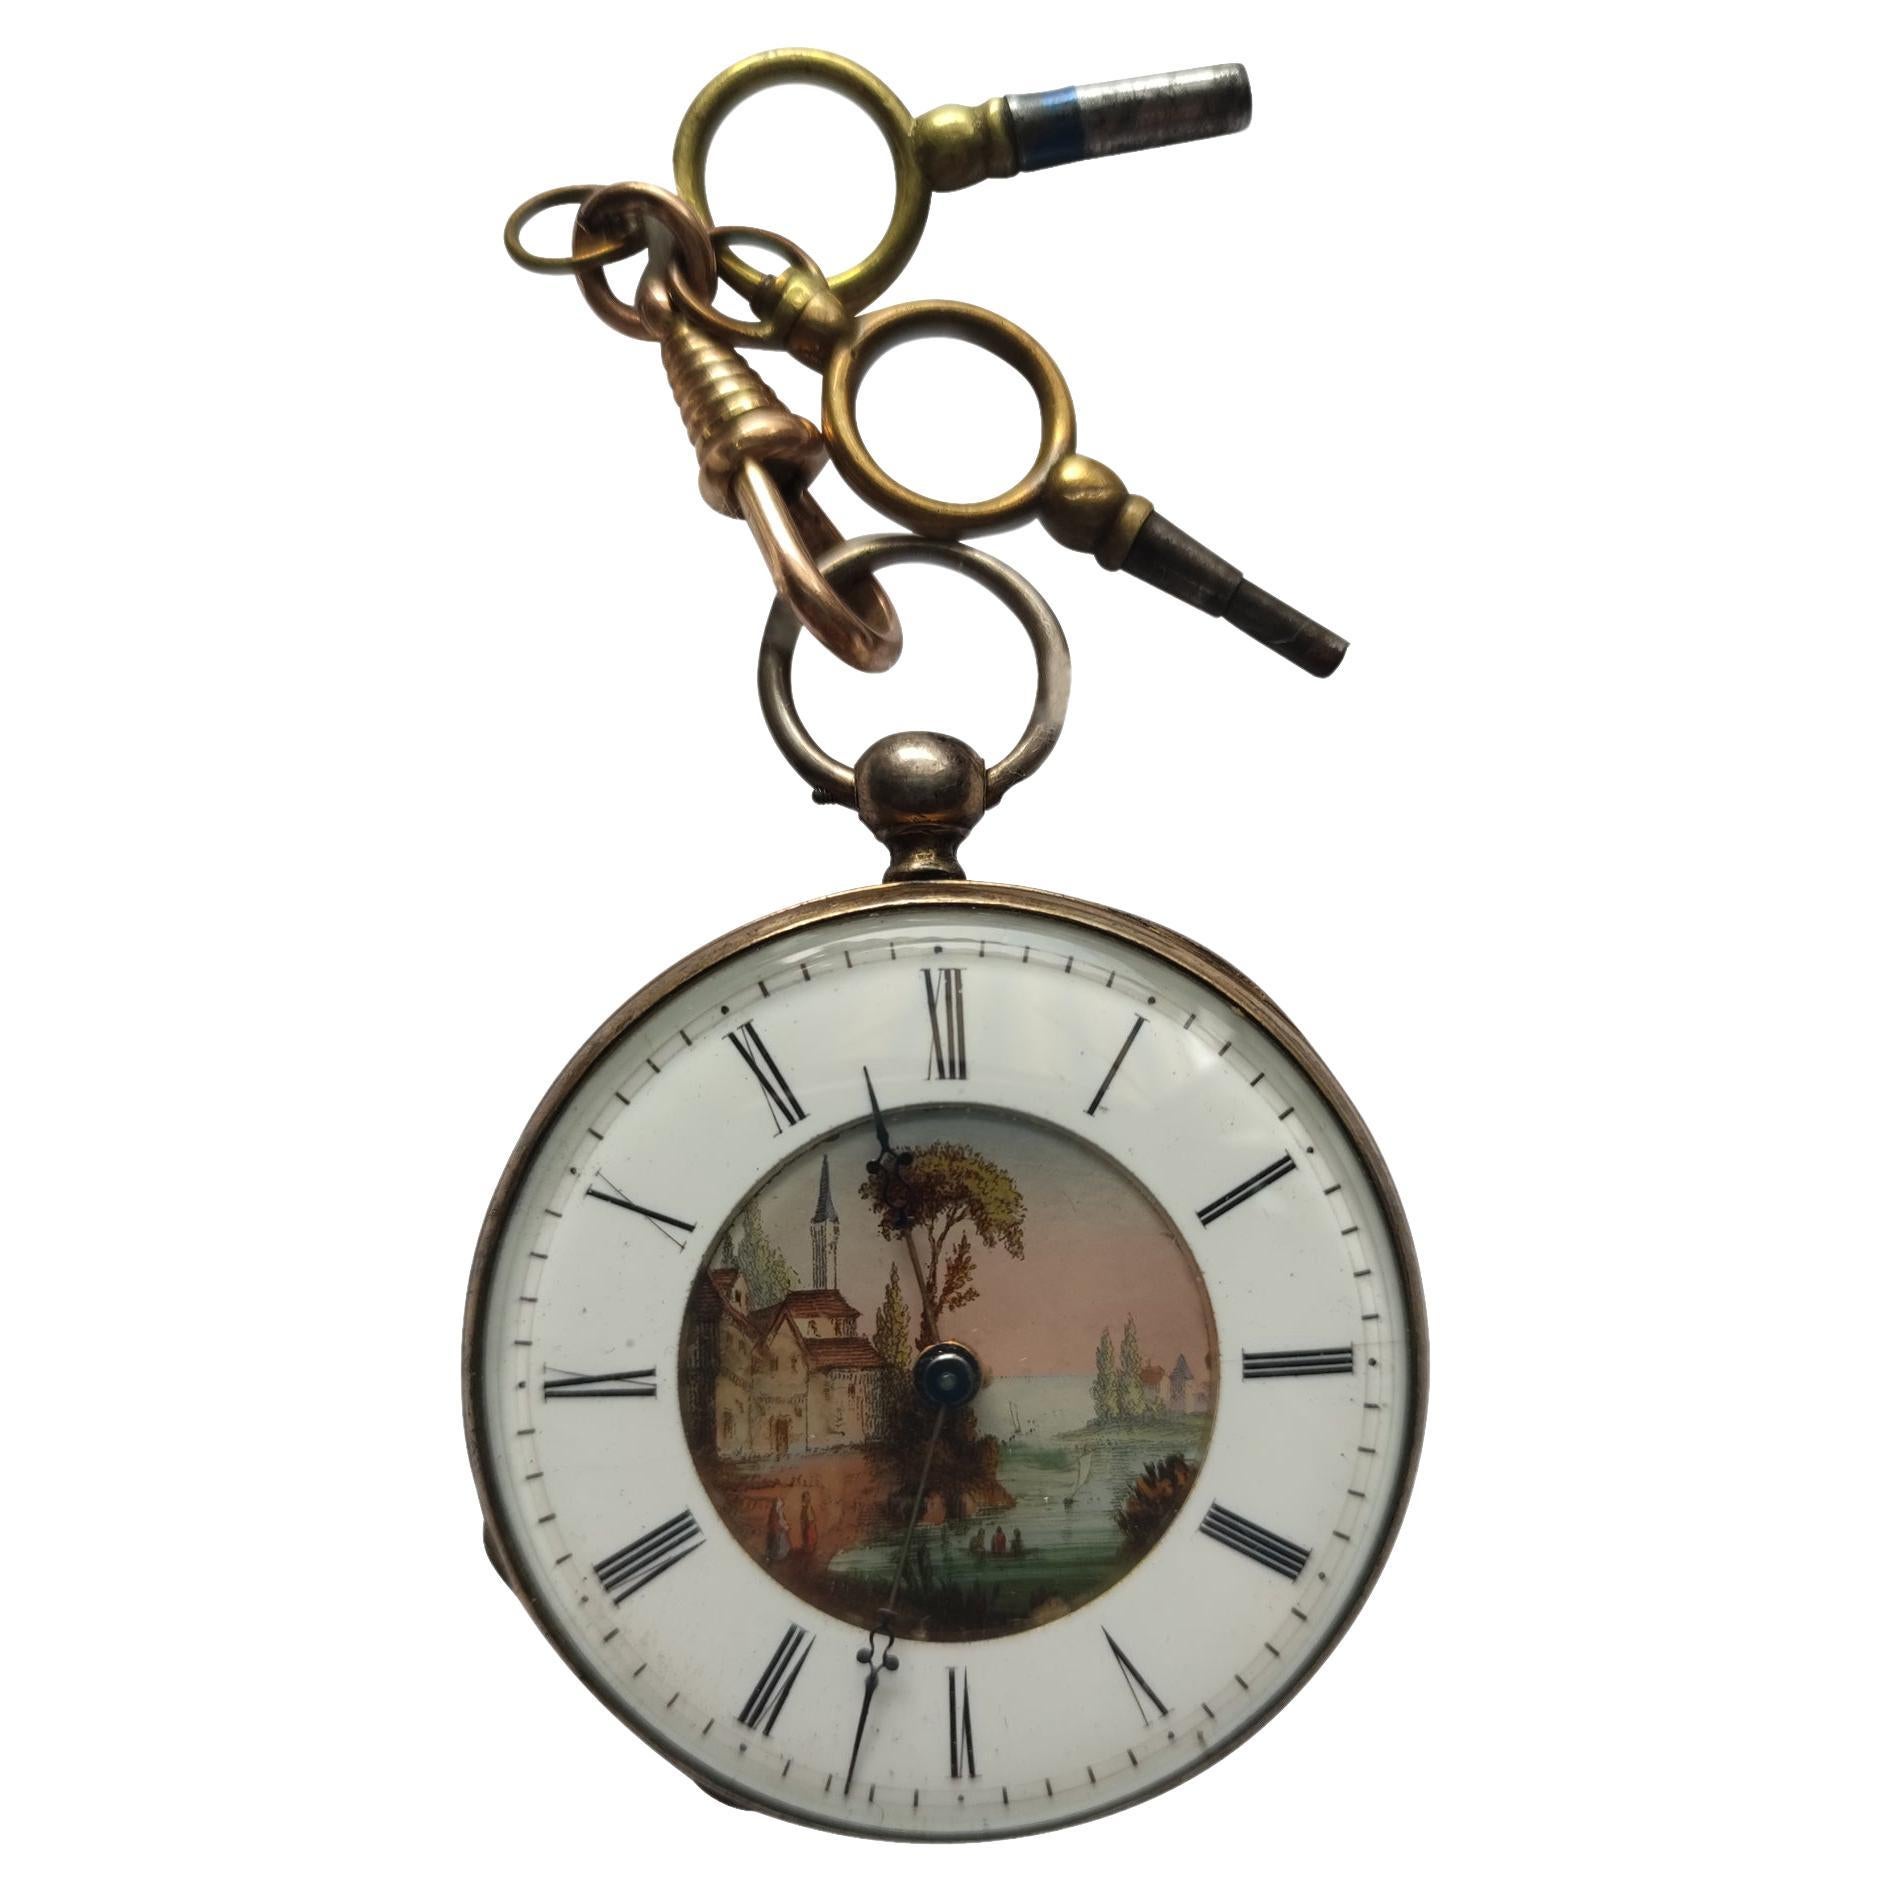 Rare Antique Pocket Key Watch French 1800s with Painted Enamel Dial For Sale